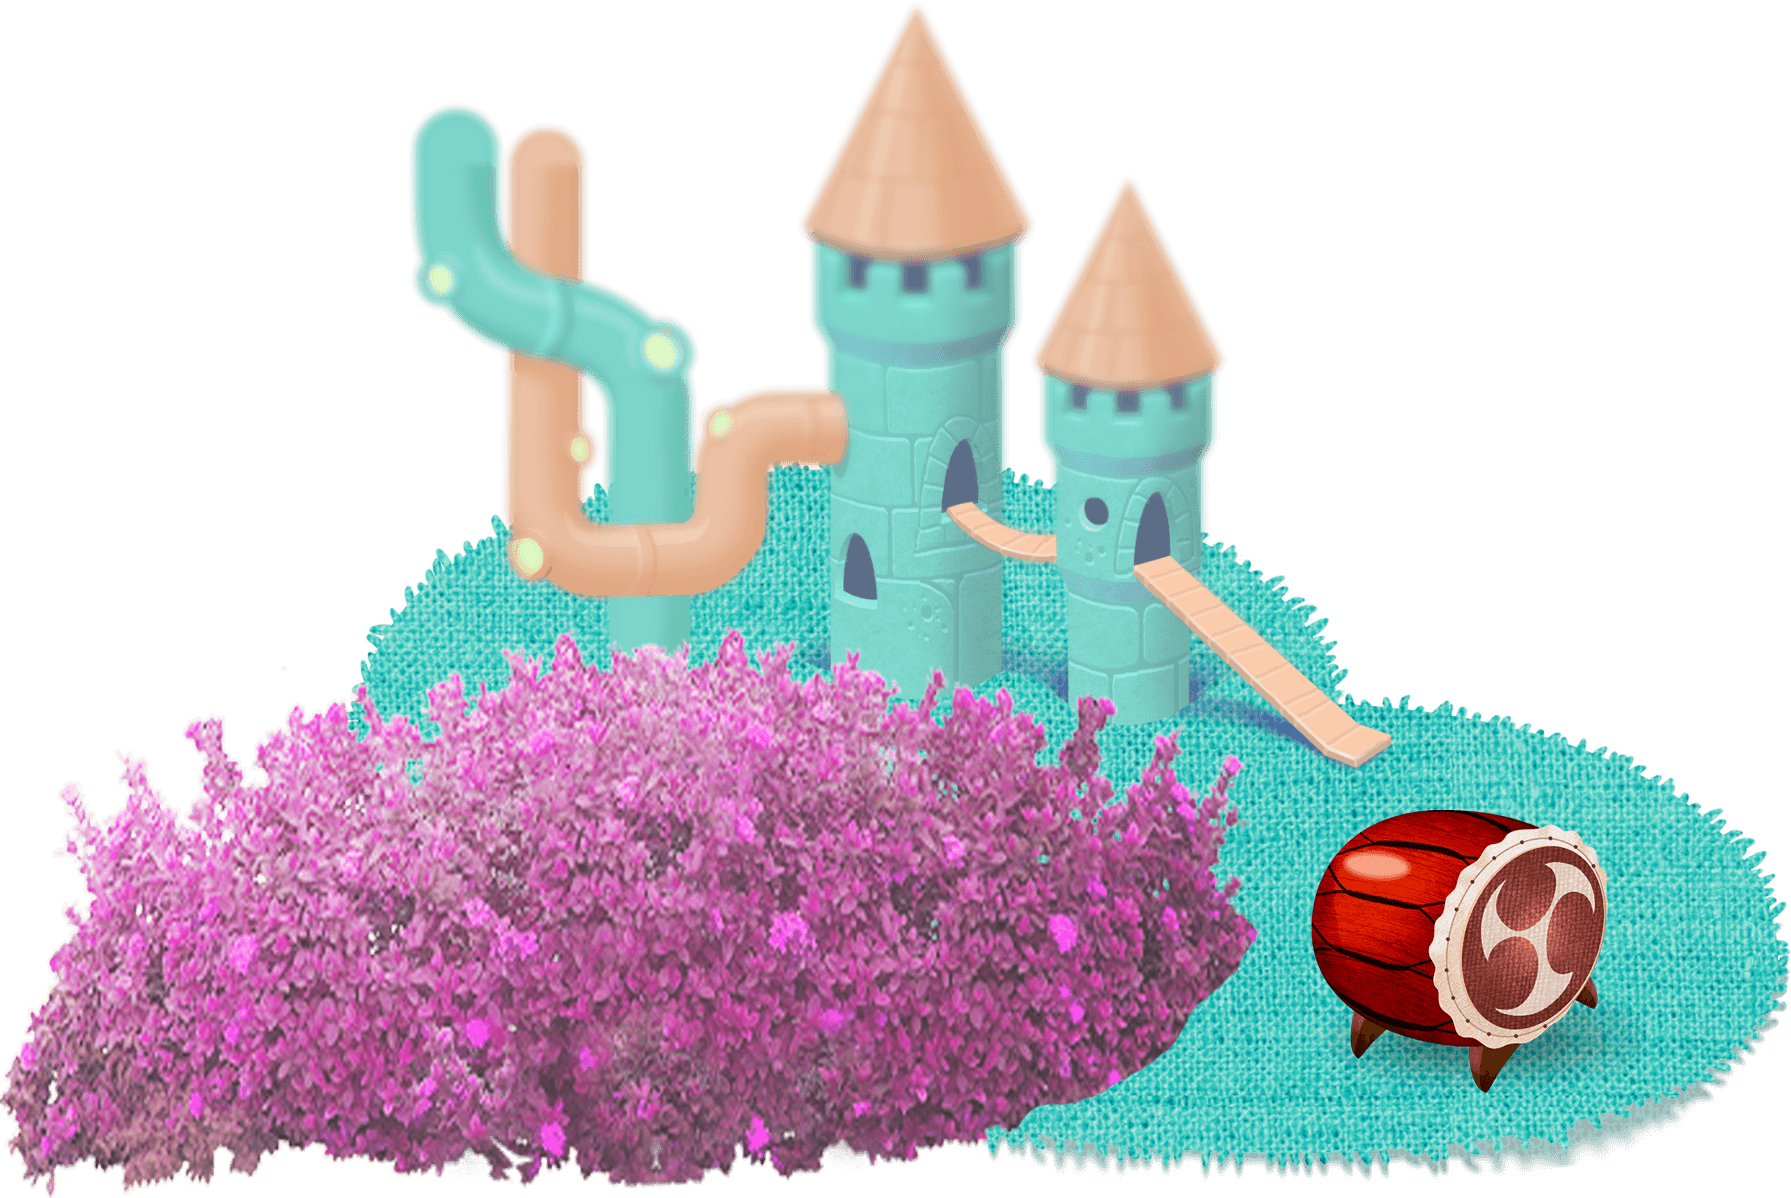 Towers on the grass, bushes and barrel